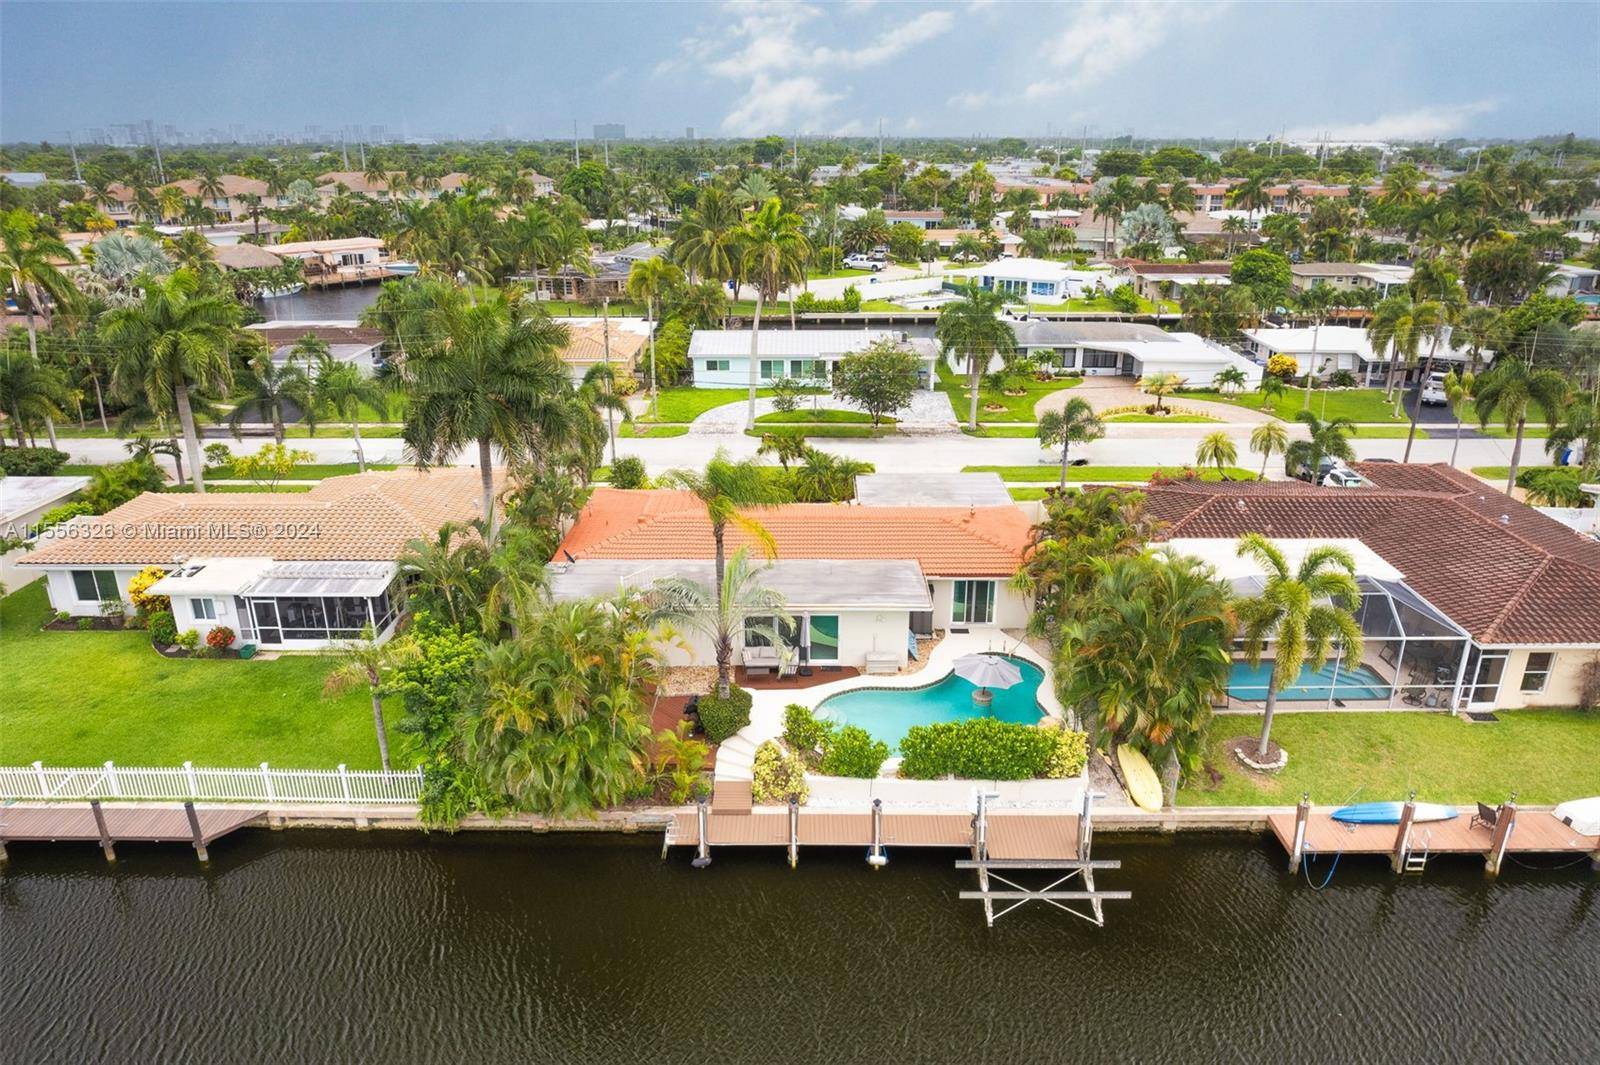 Great located house with 2 pools in safe quiet area with private dock and accessible to the ocean in 25 minutes by water !